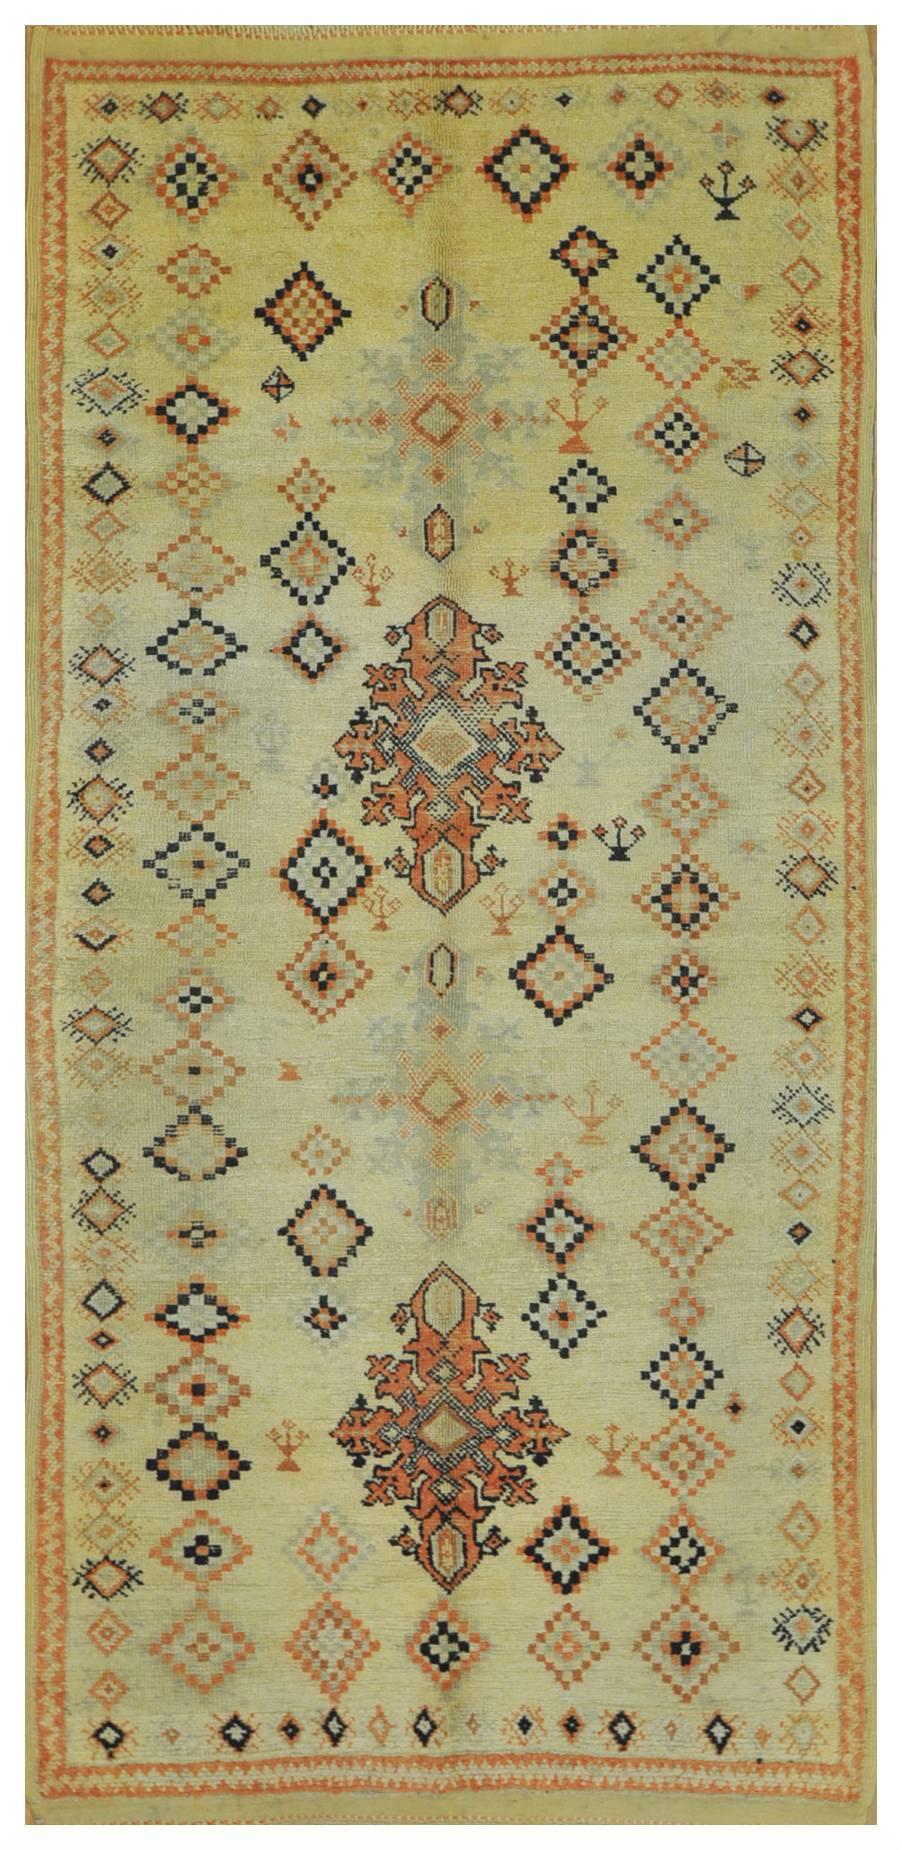 Vintage Hand-Knotted Moroccan Rug In Excellent Condition For Sale In Atlanta, GA